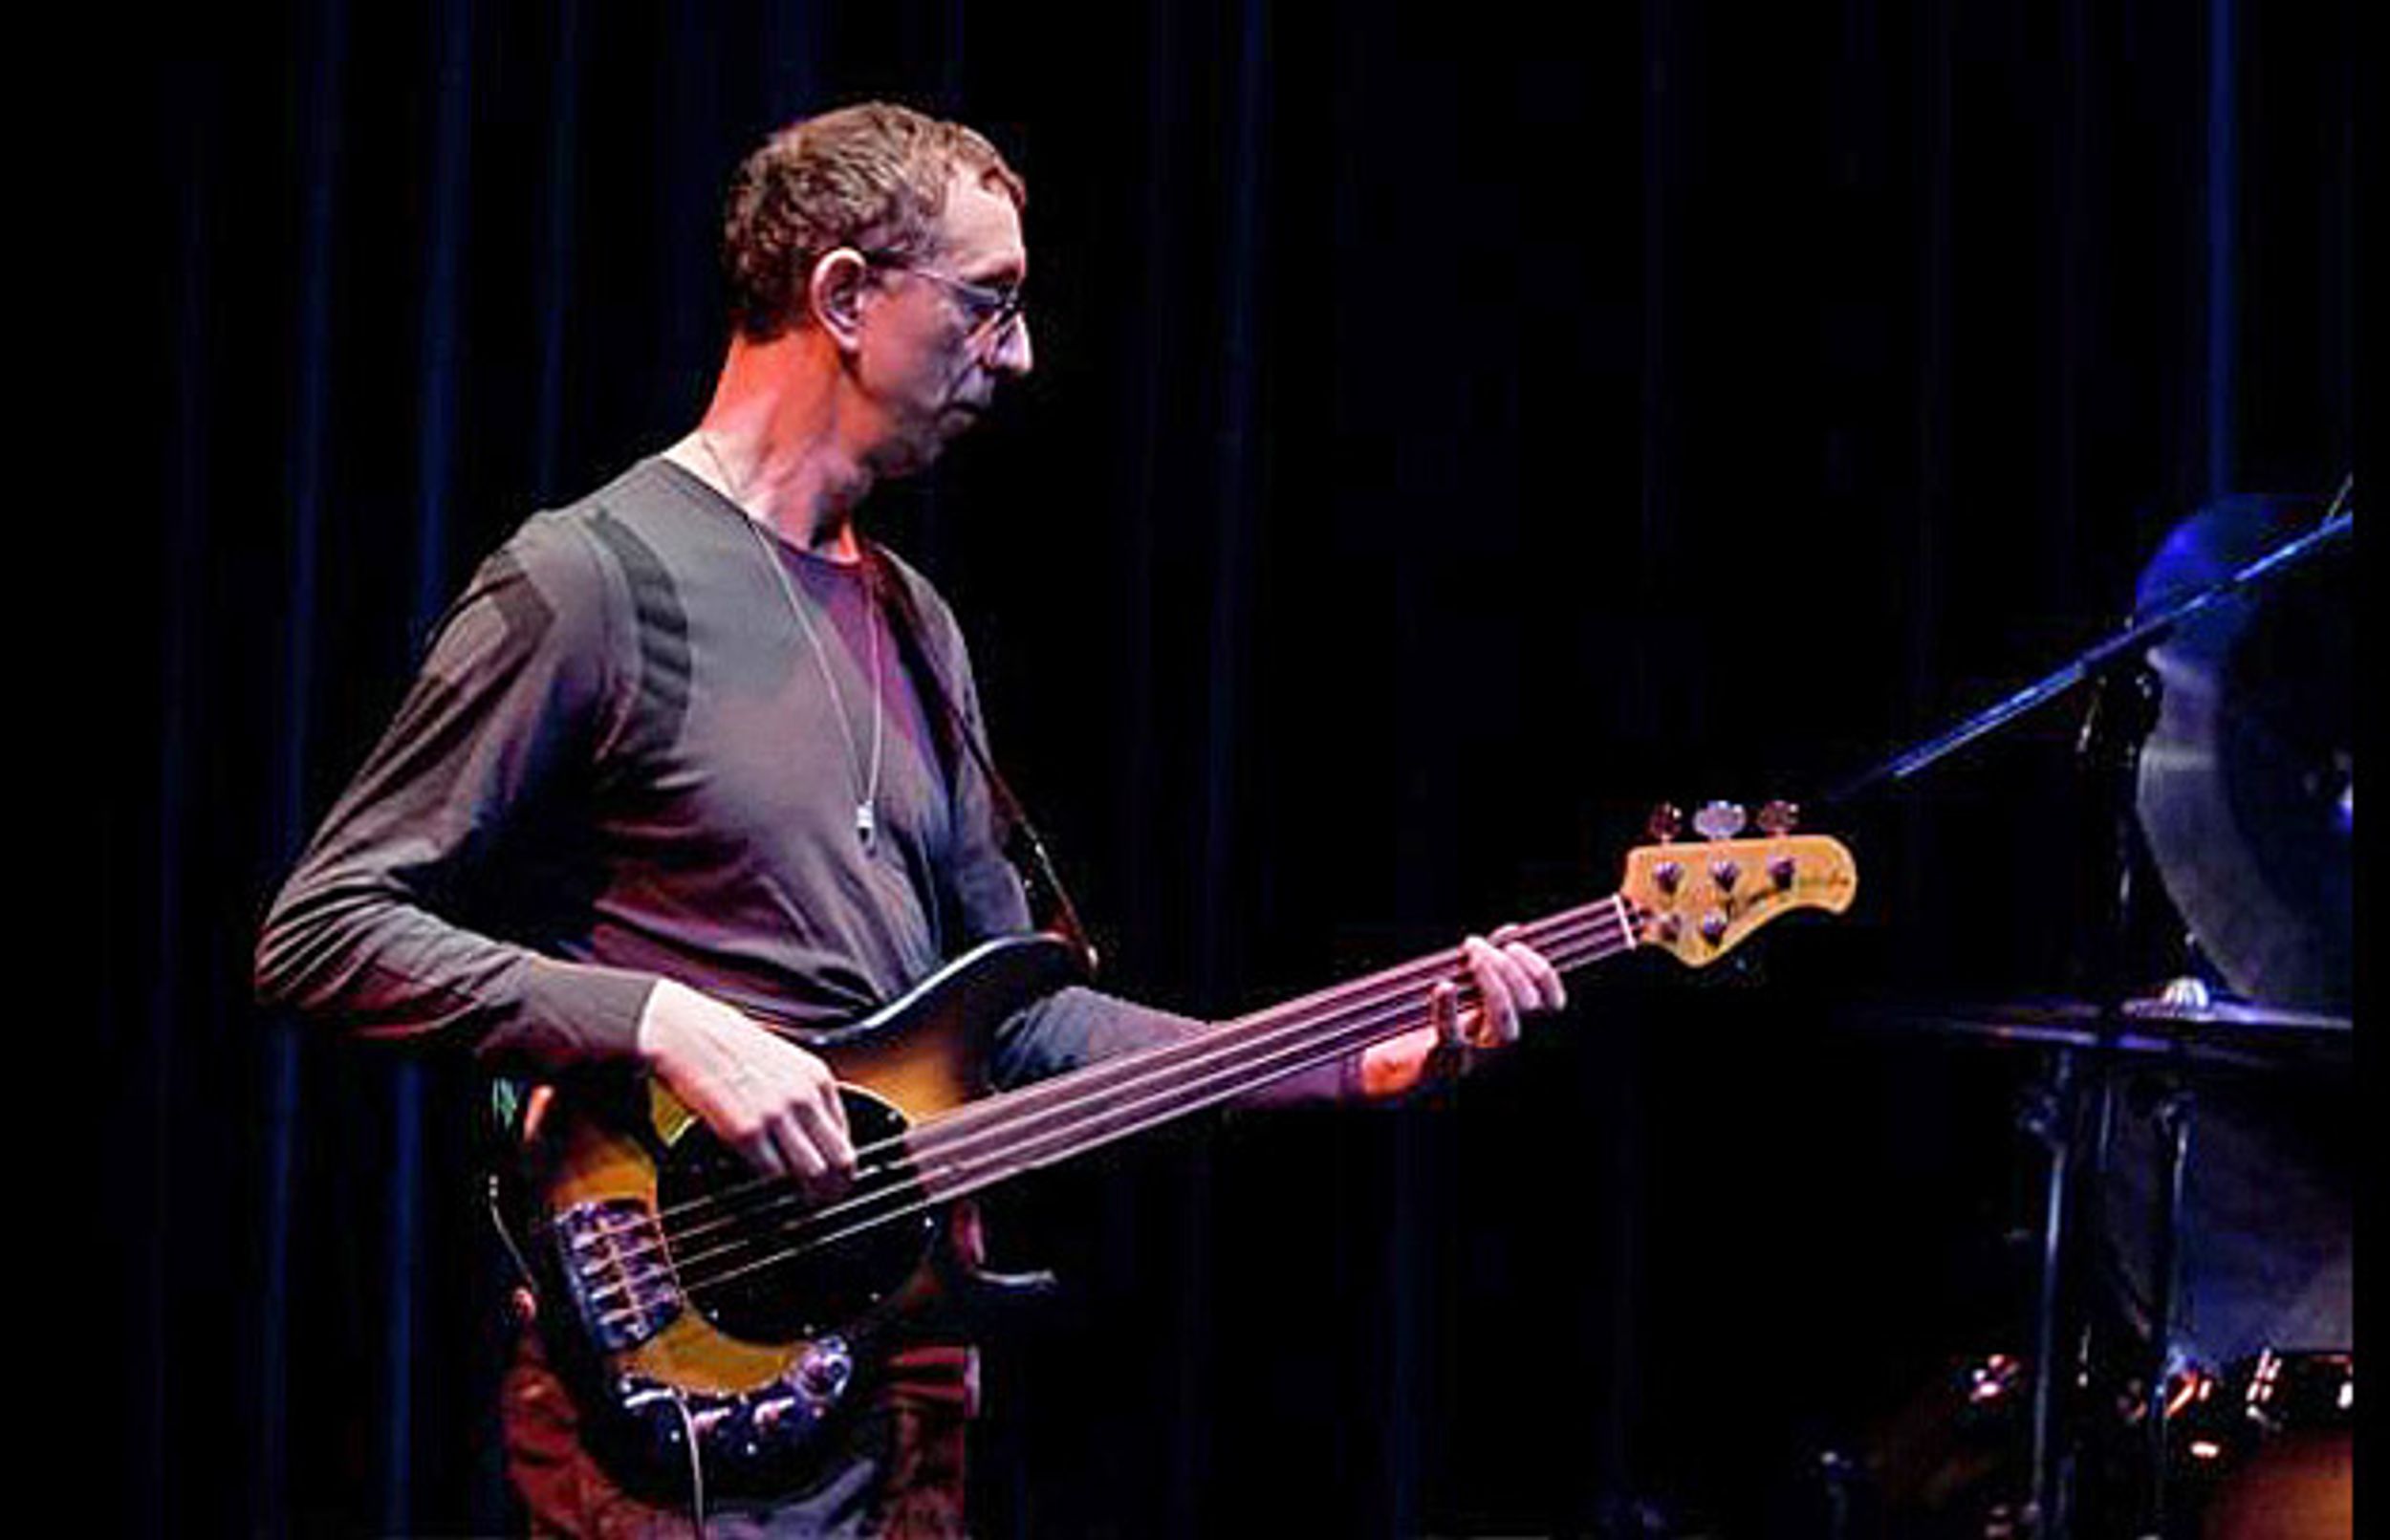 On Bass: Developing Your Solo Voice